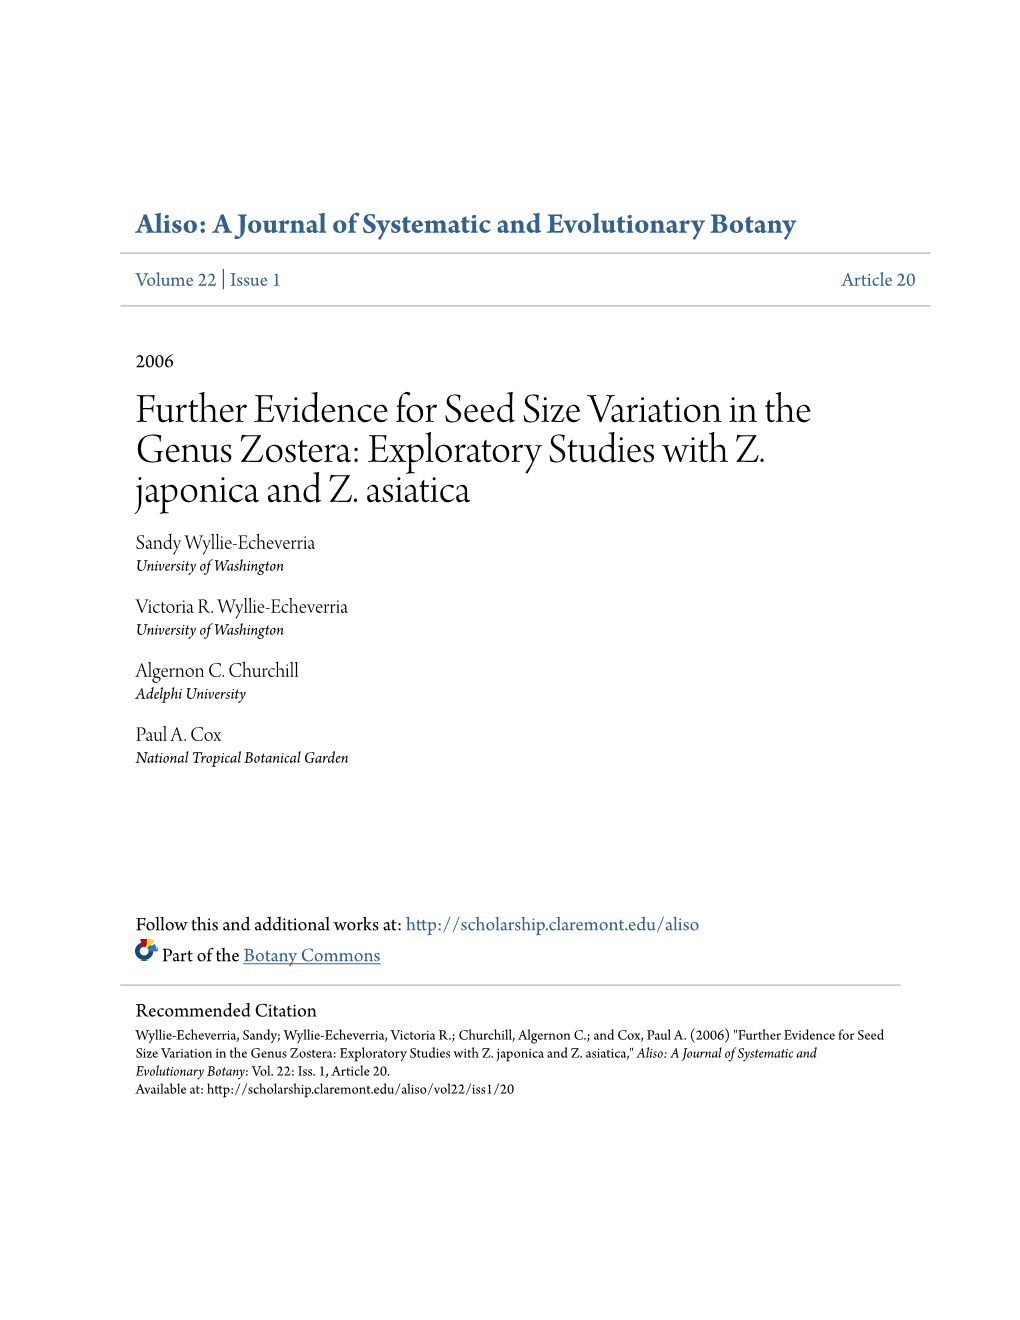 Further Evidence for Seed Size Variation in the Genus Zostera: Exploratory Studies with Z